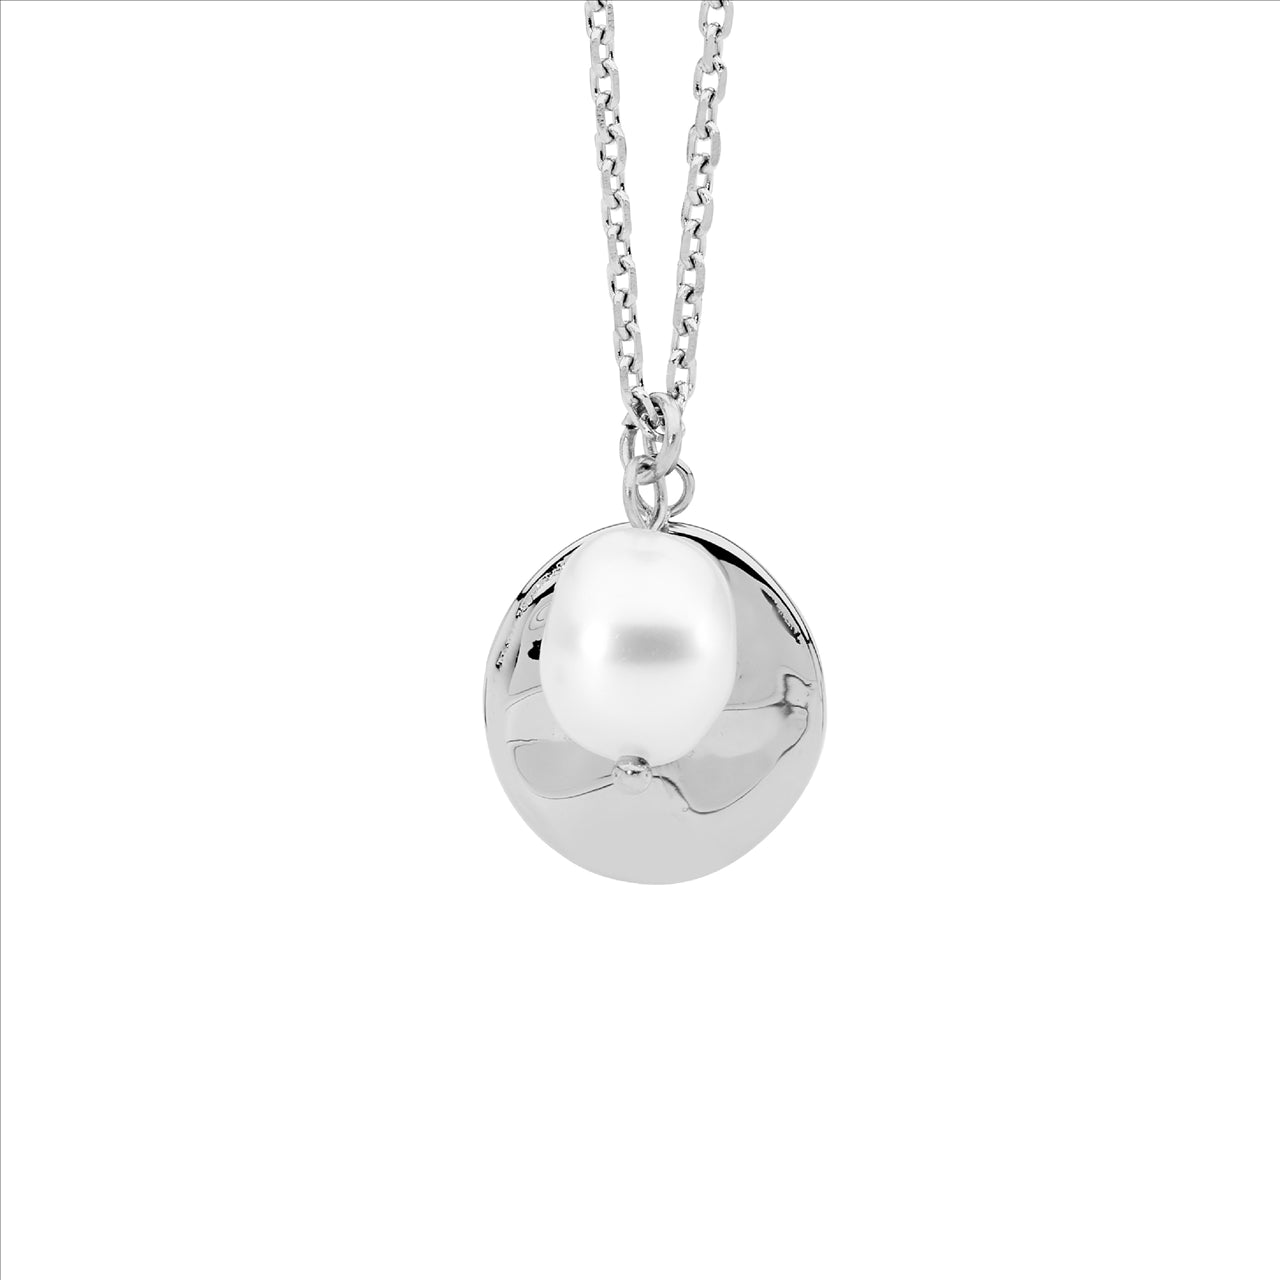 Silver Plated Stainless Steel Disk w/ Freshwater Pearl Pendant